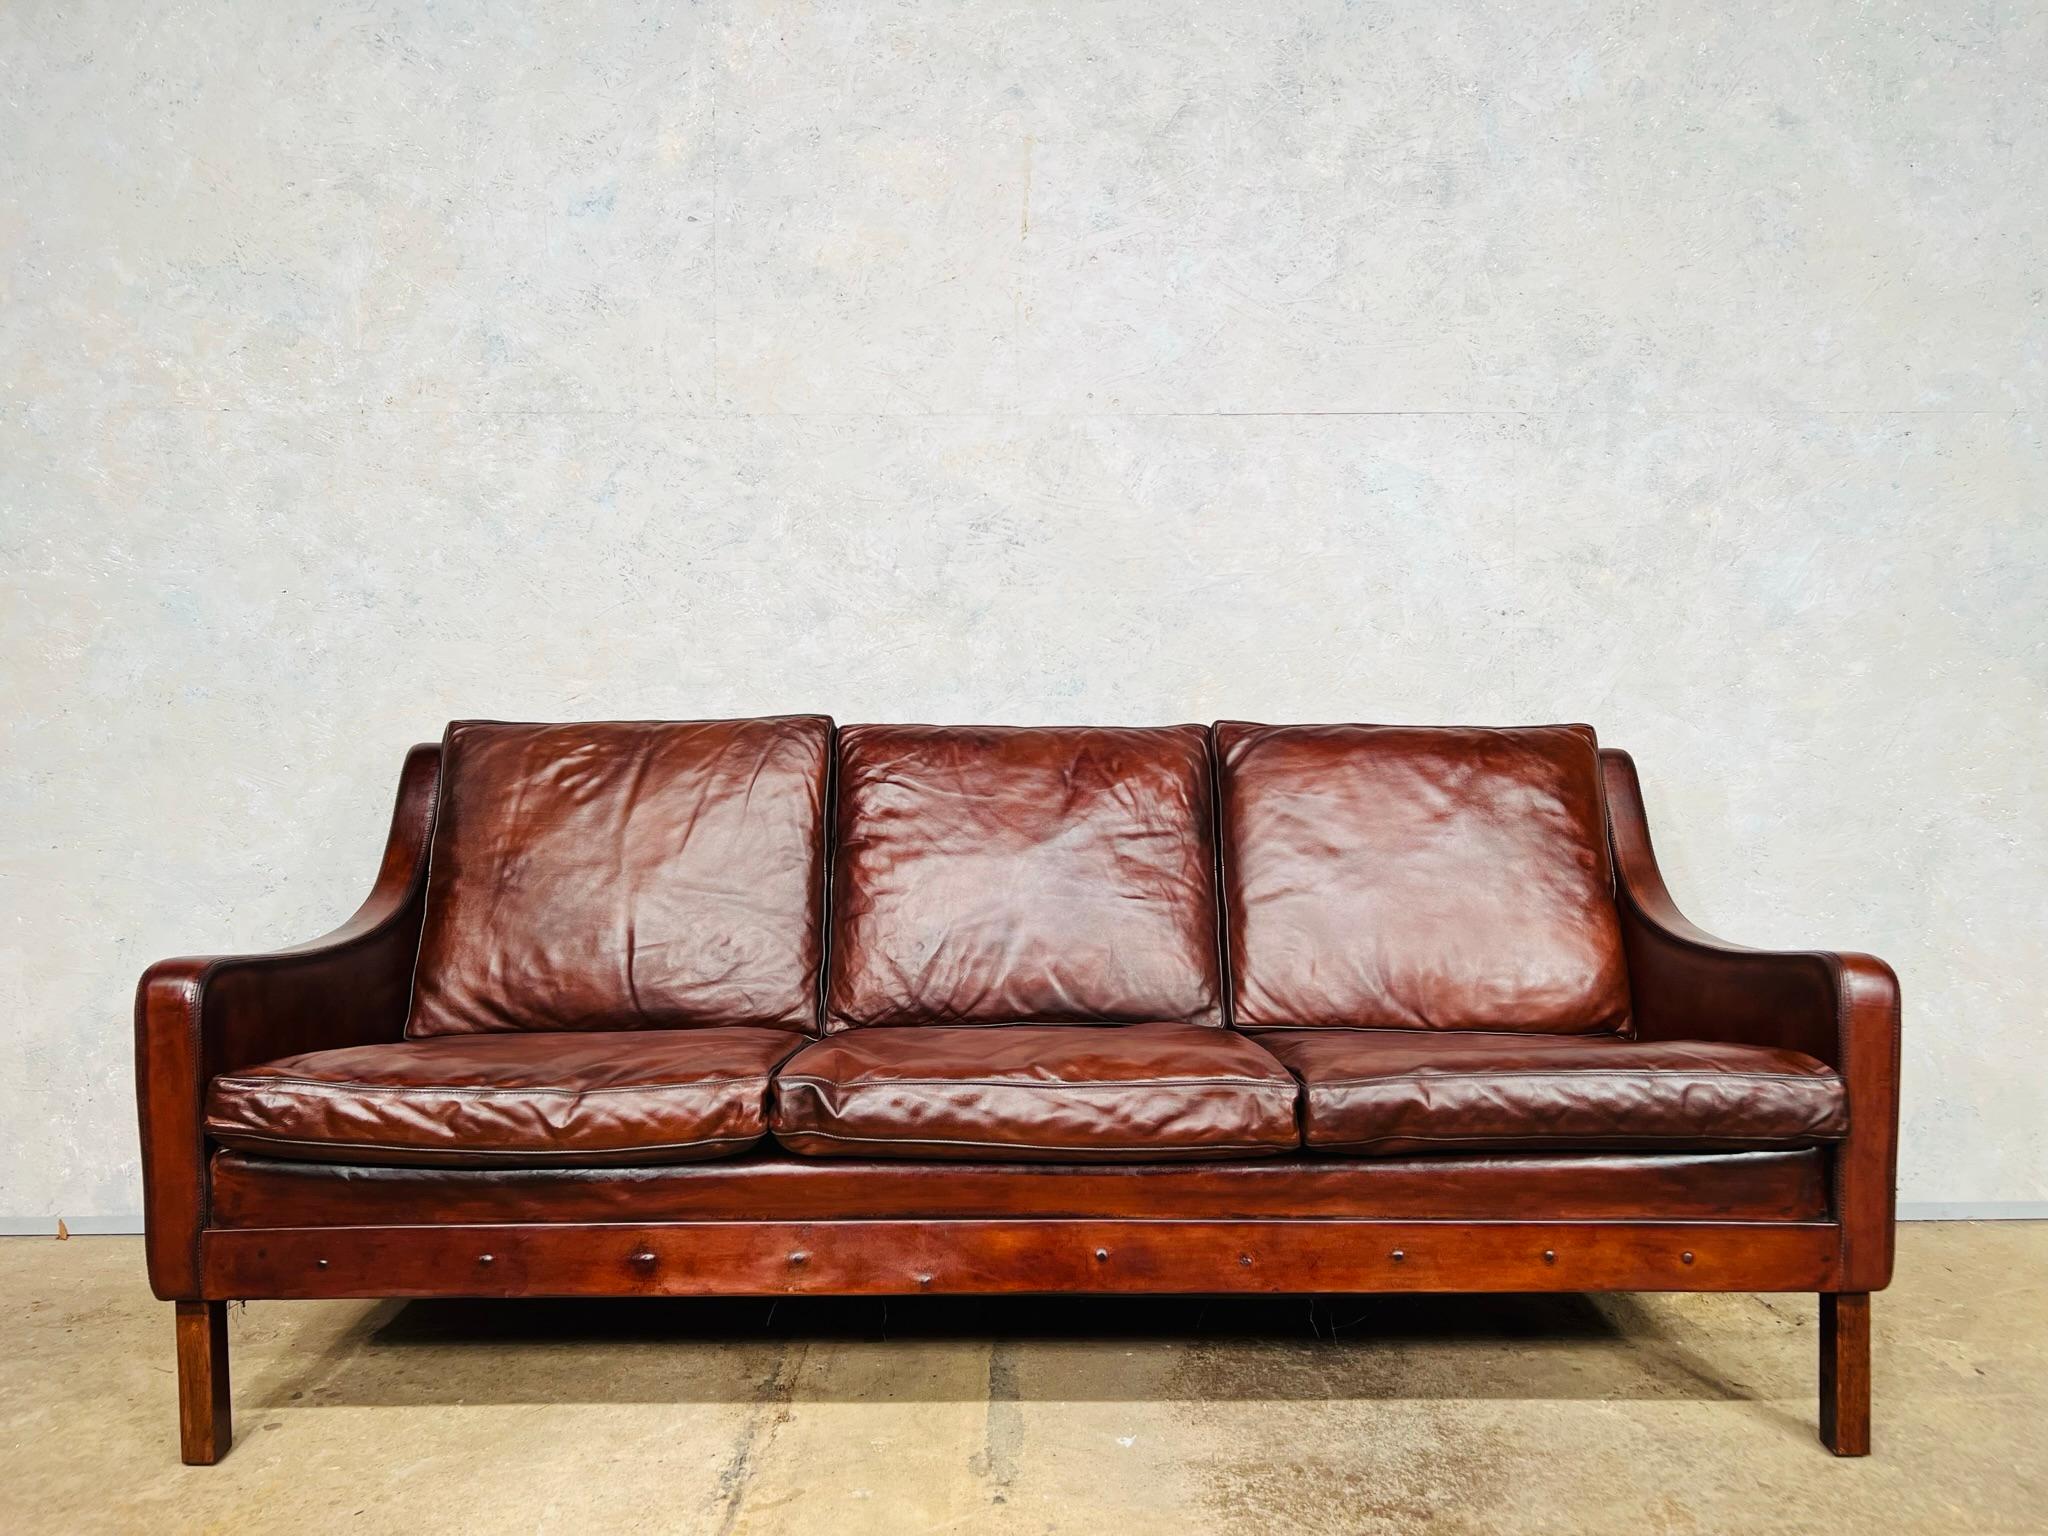 Very Elegant Vintage 1970s Danish 3 Seater Tan Leather Sofa Rosewood Legs In Good Condition For Sale In Lewes, GB